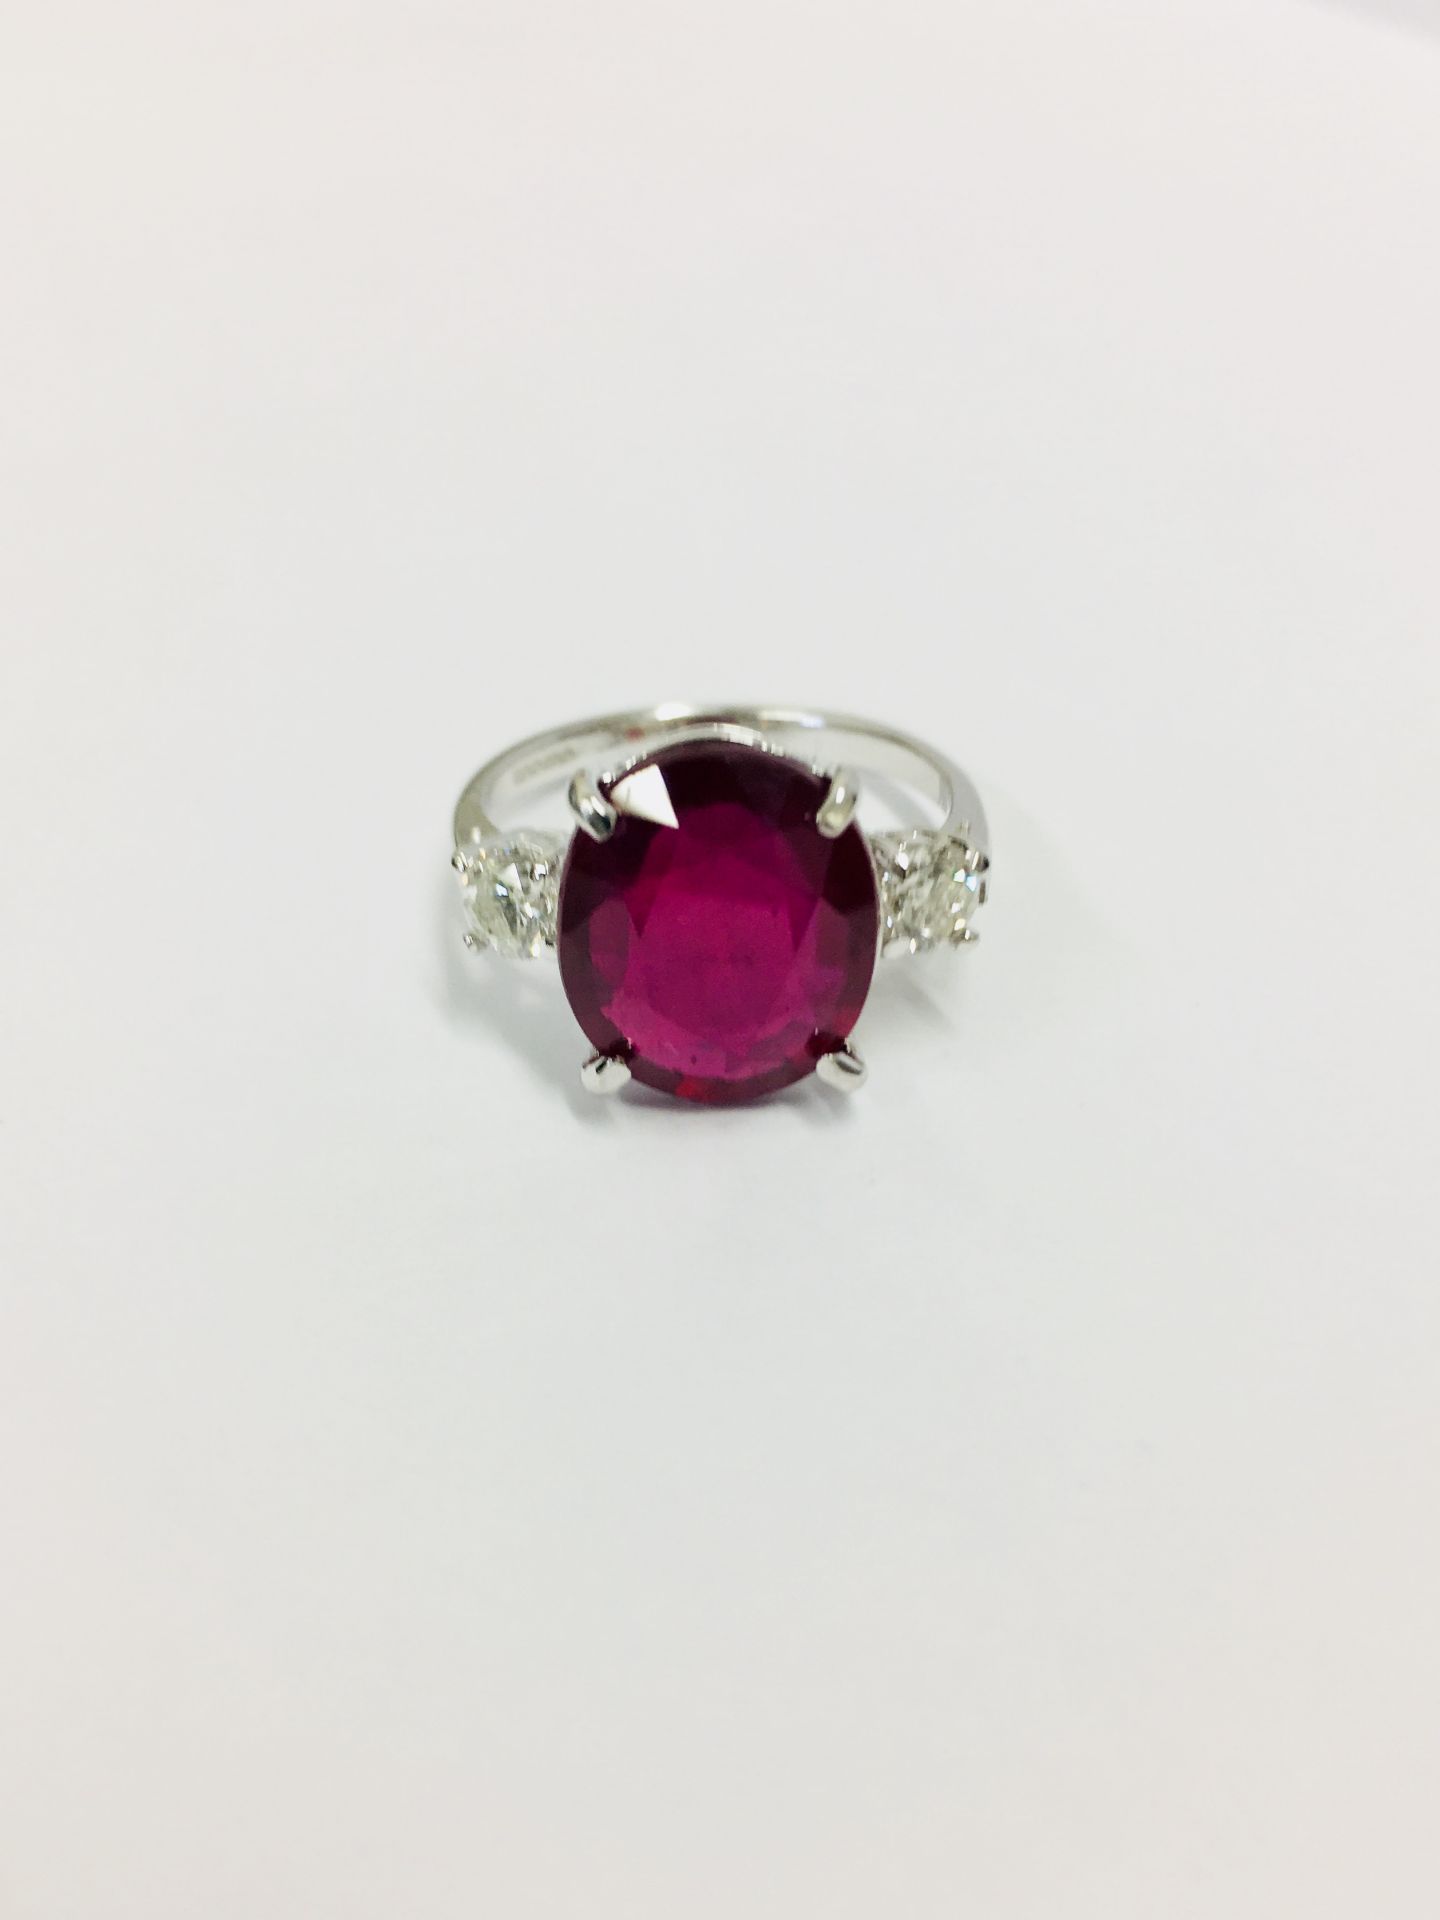 6ct Oval Ruby 0.50ct Diamonds 18ct white gold three stone ring,6ct Ruby 13mmx1mm natural(treated) 2x - Image 3 of 3